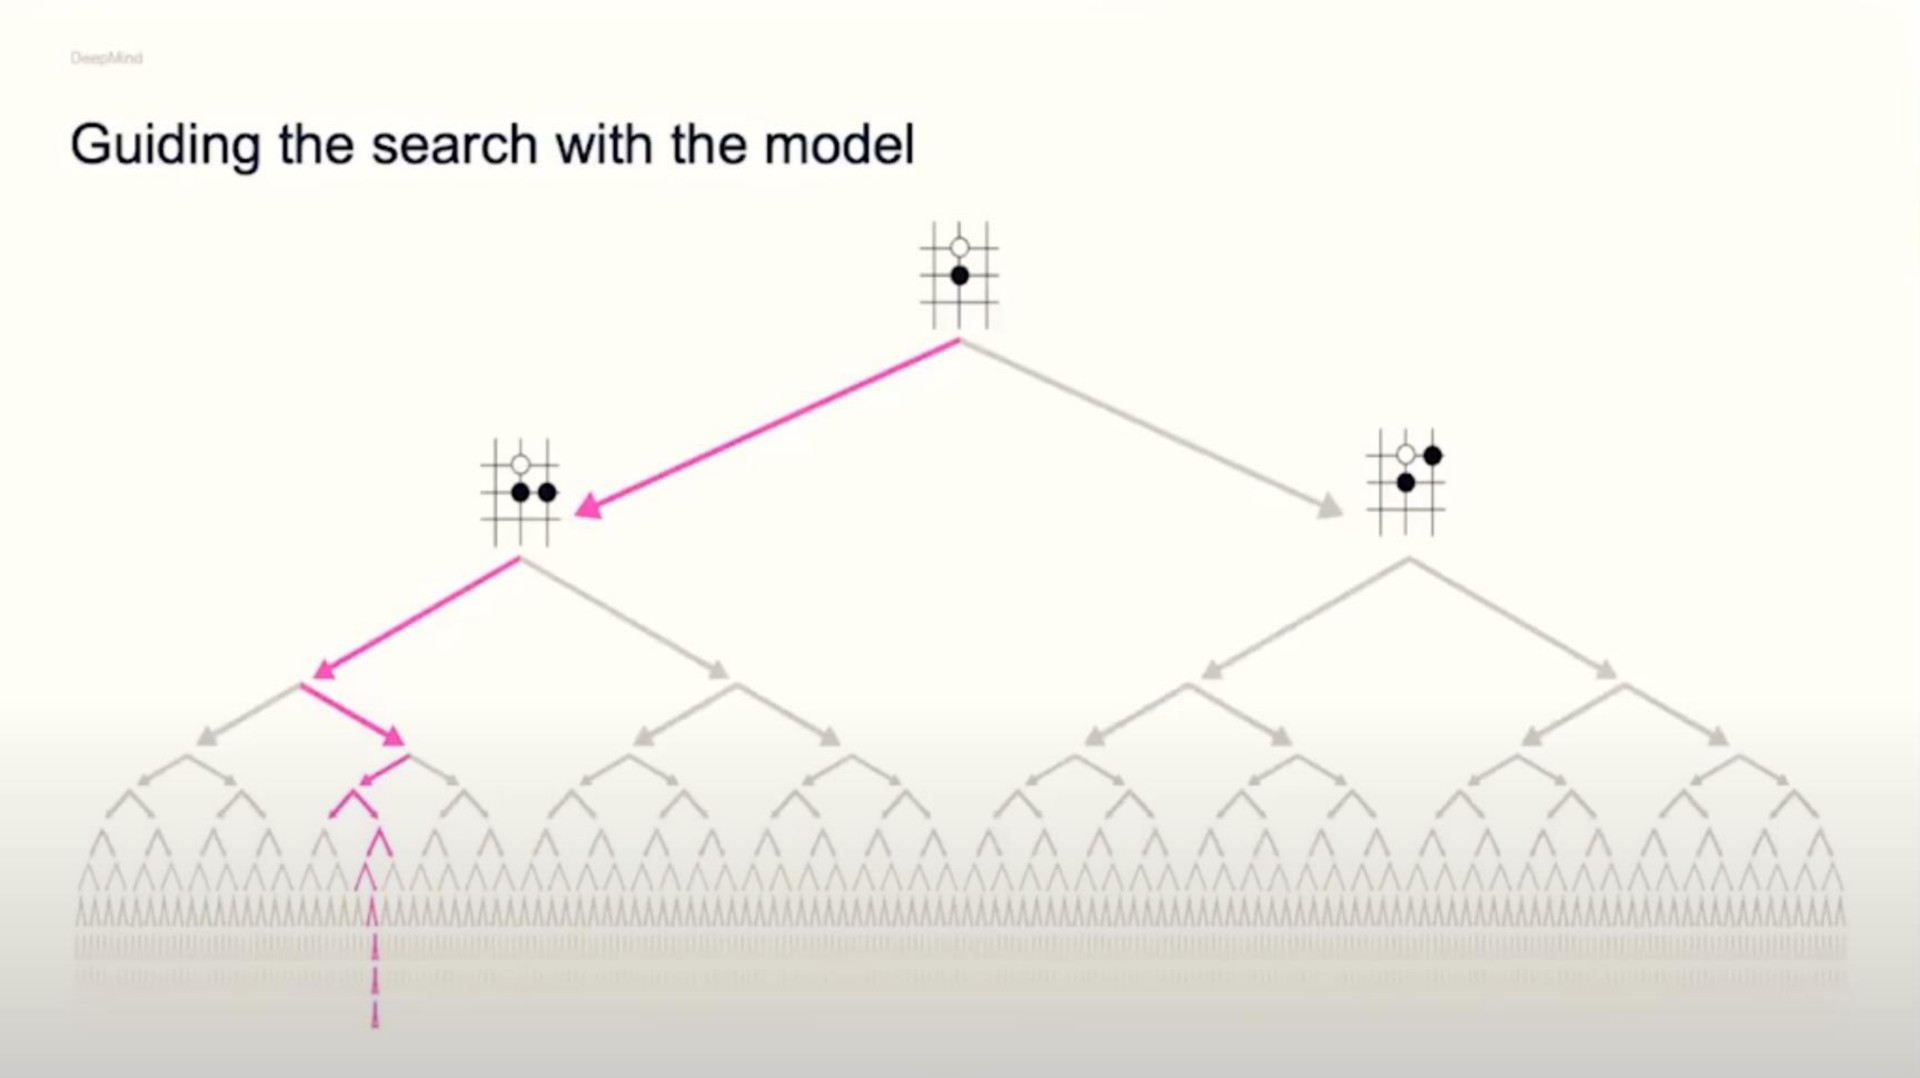 guiding the search with the model a | DeepMind